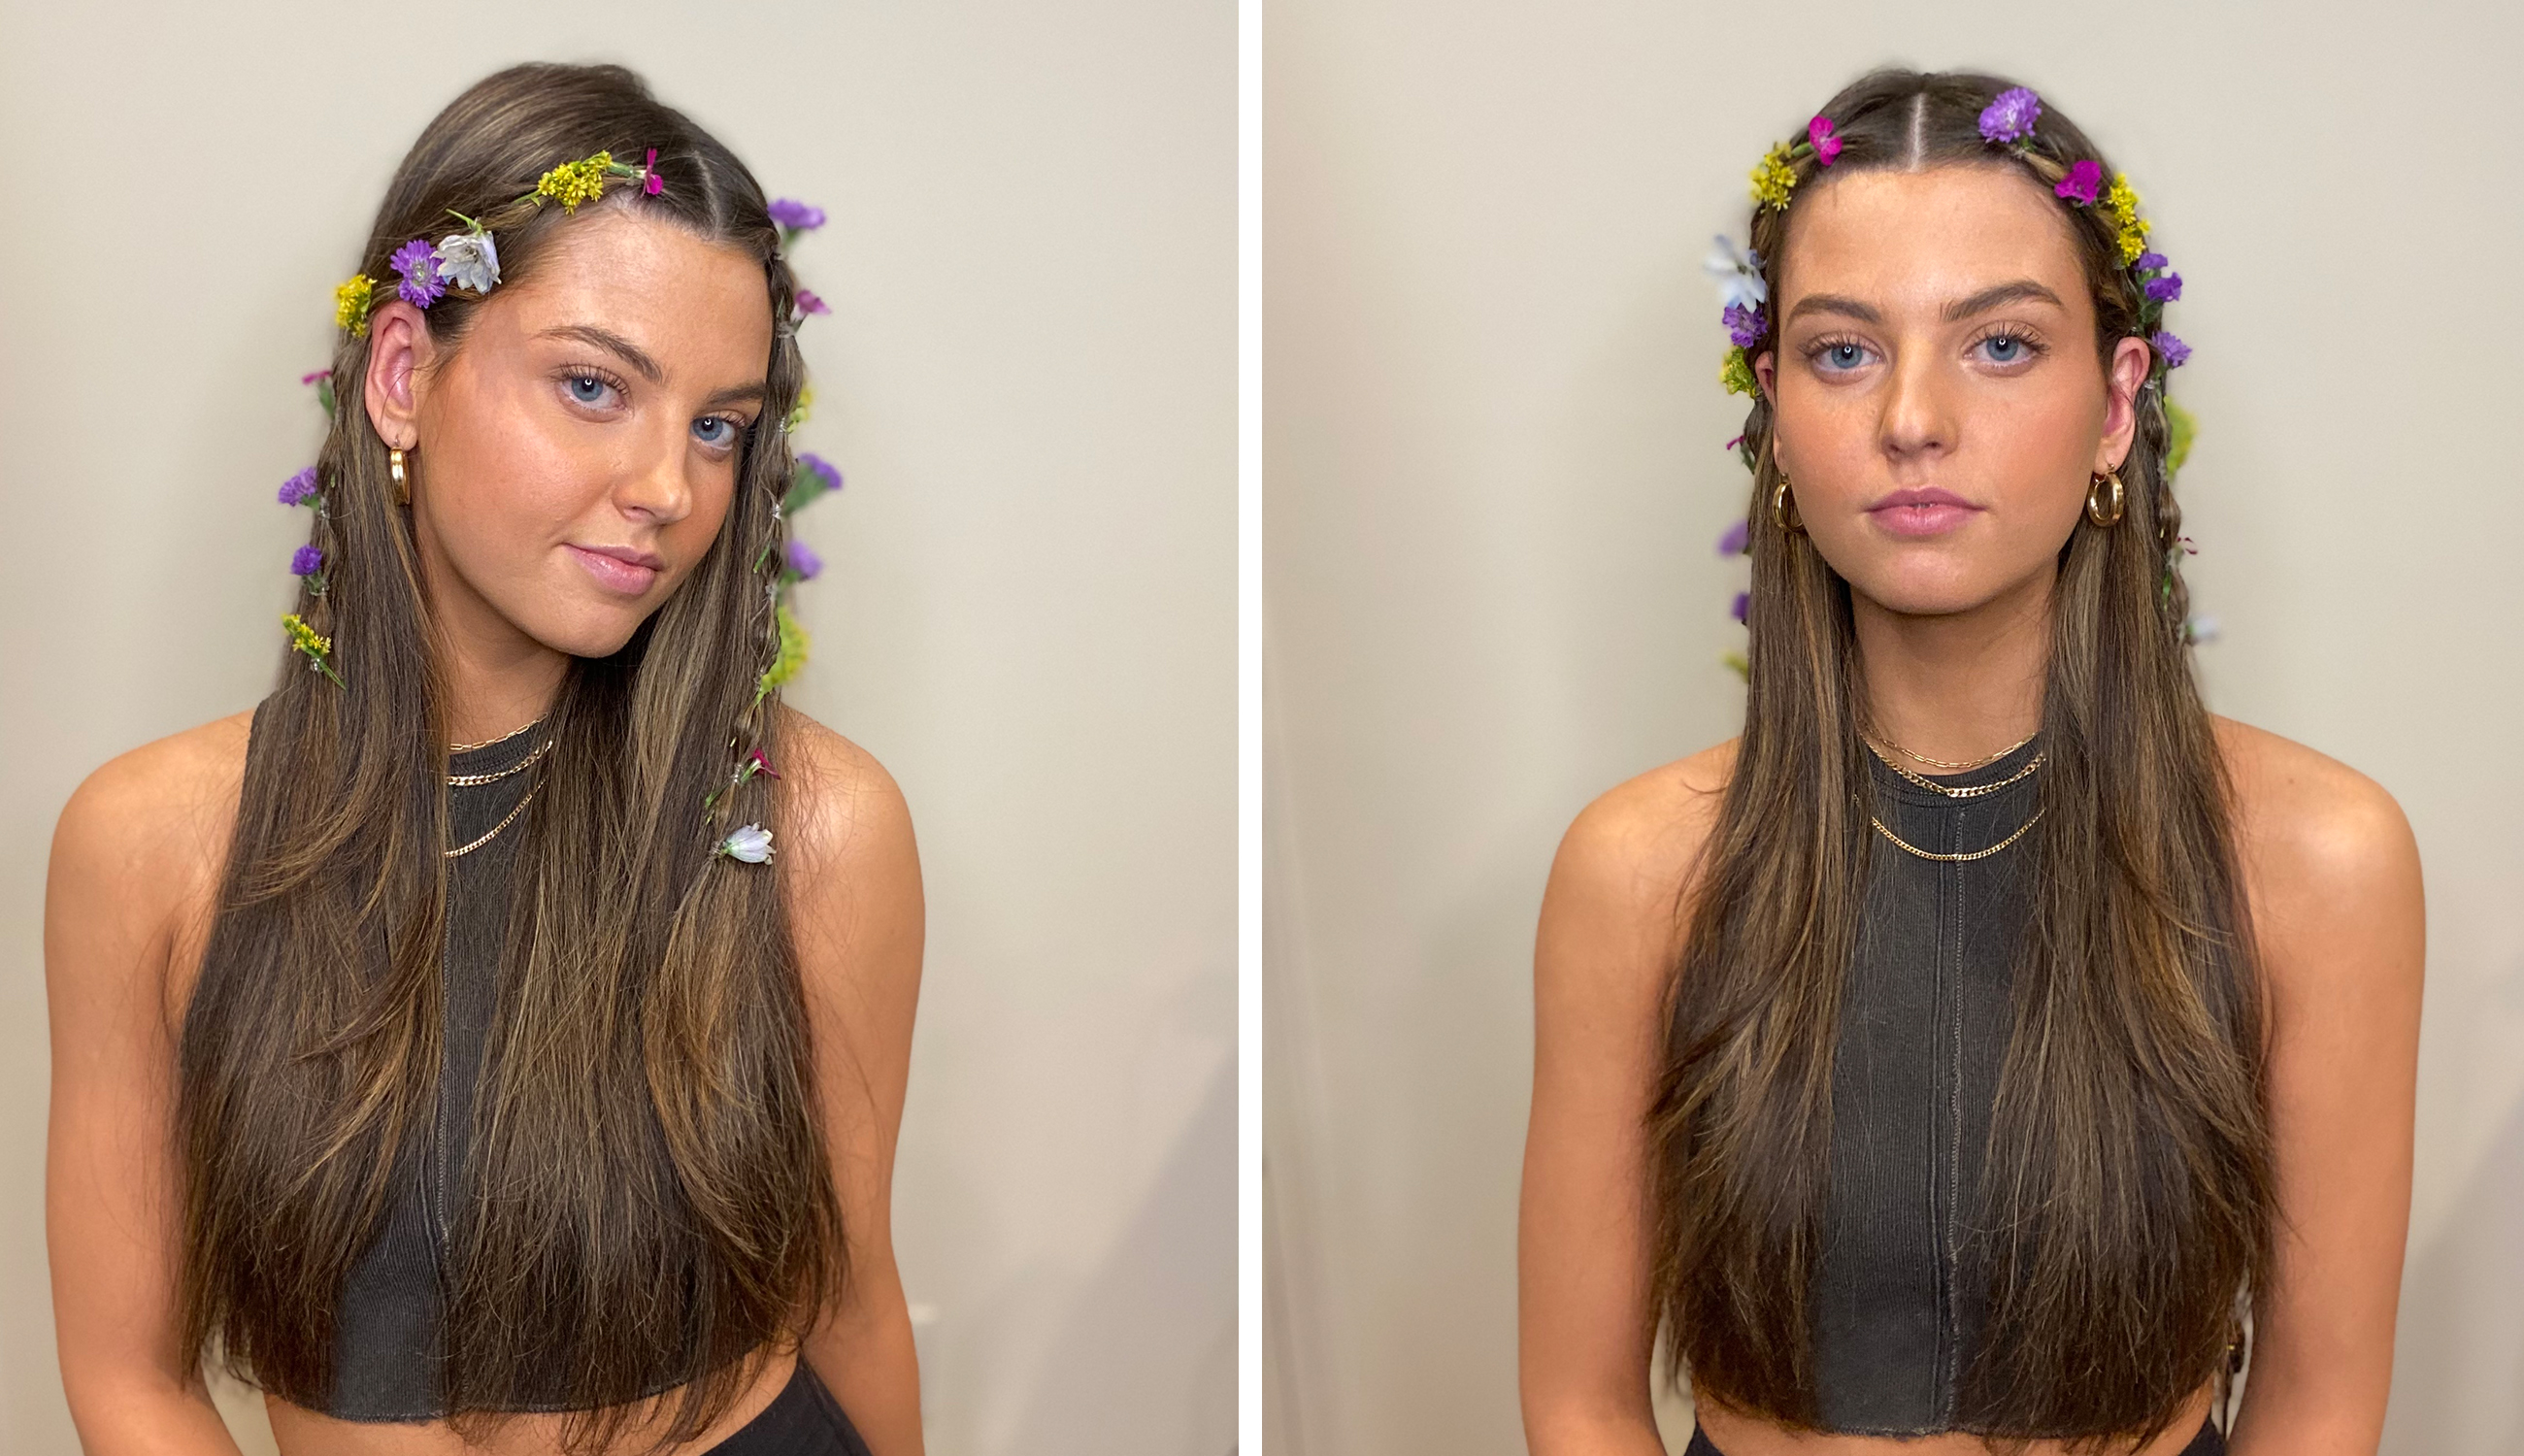 Model showing off hairstyle designed for festival season with fresh flowers